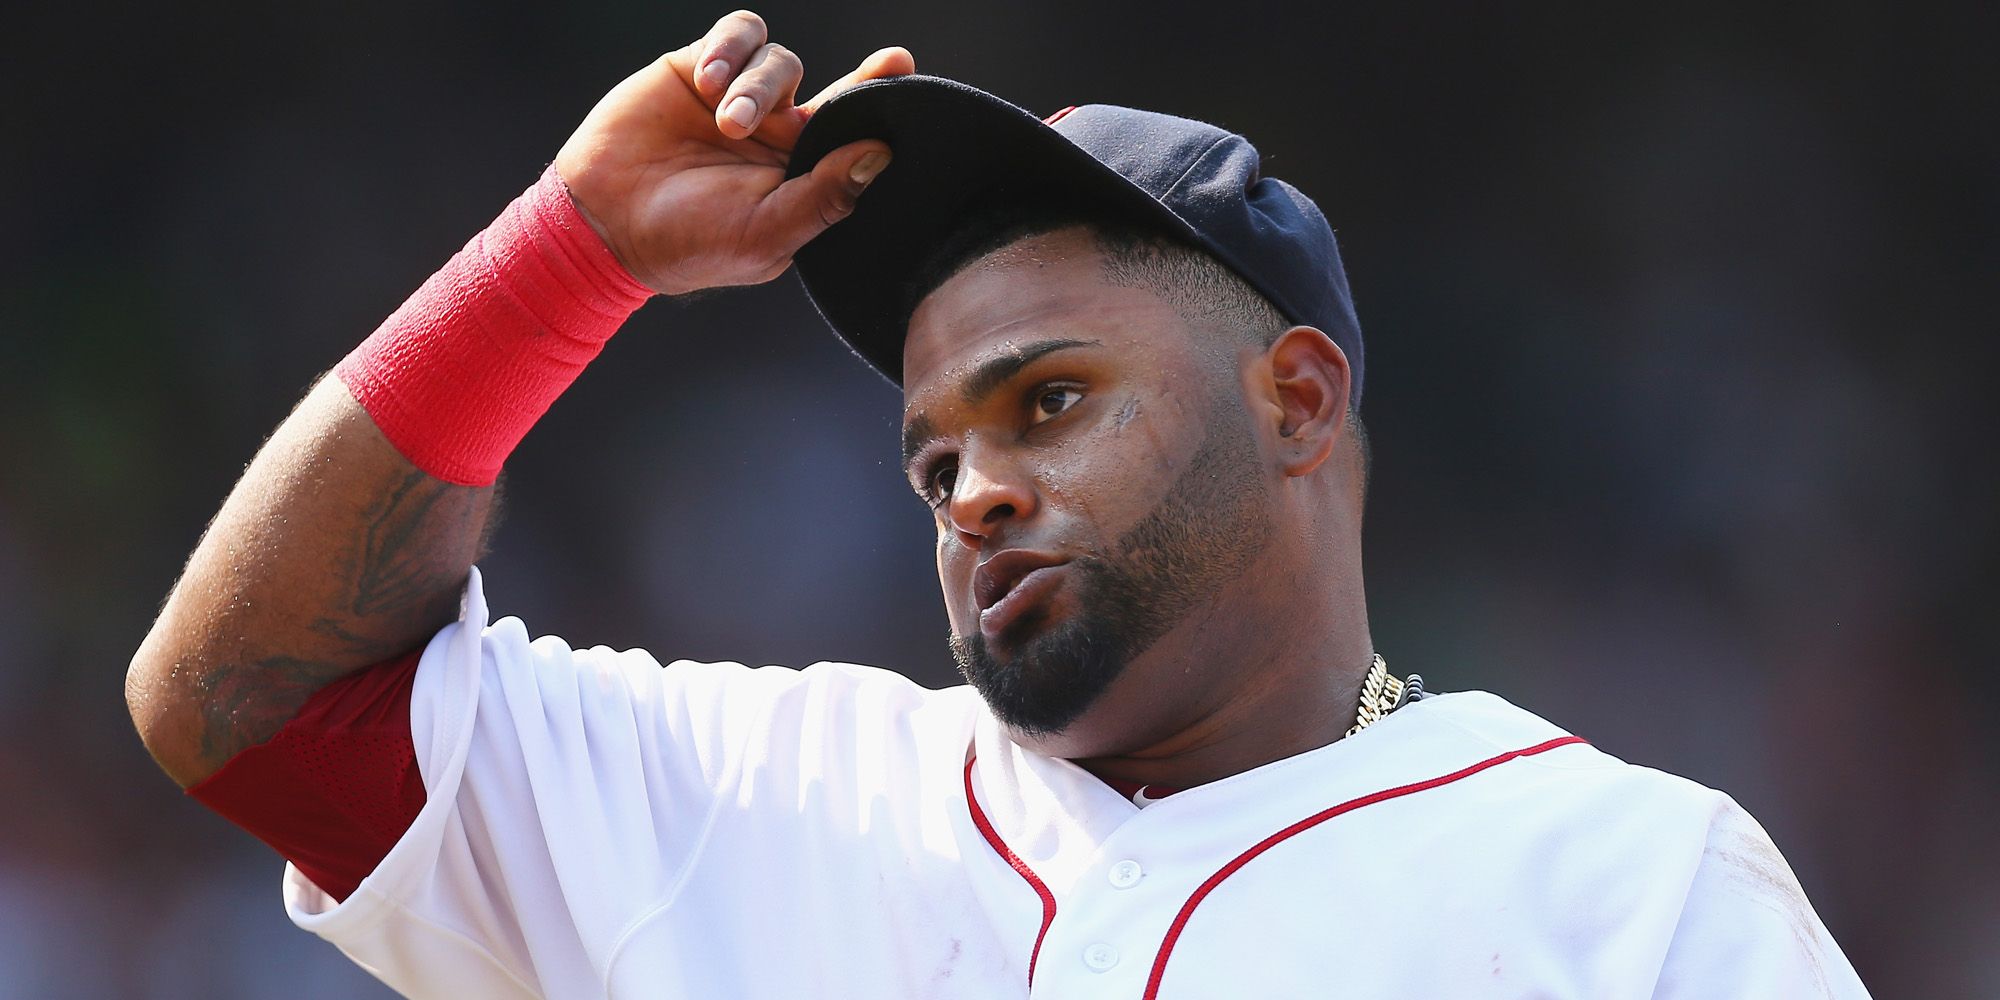 Silverman: No one will be missing Pablo Sandoval for now – Boston